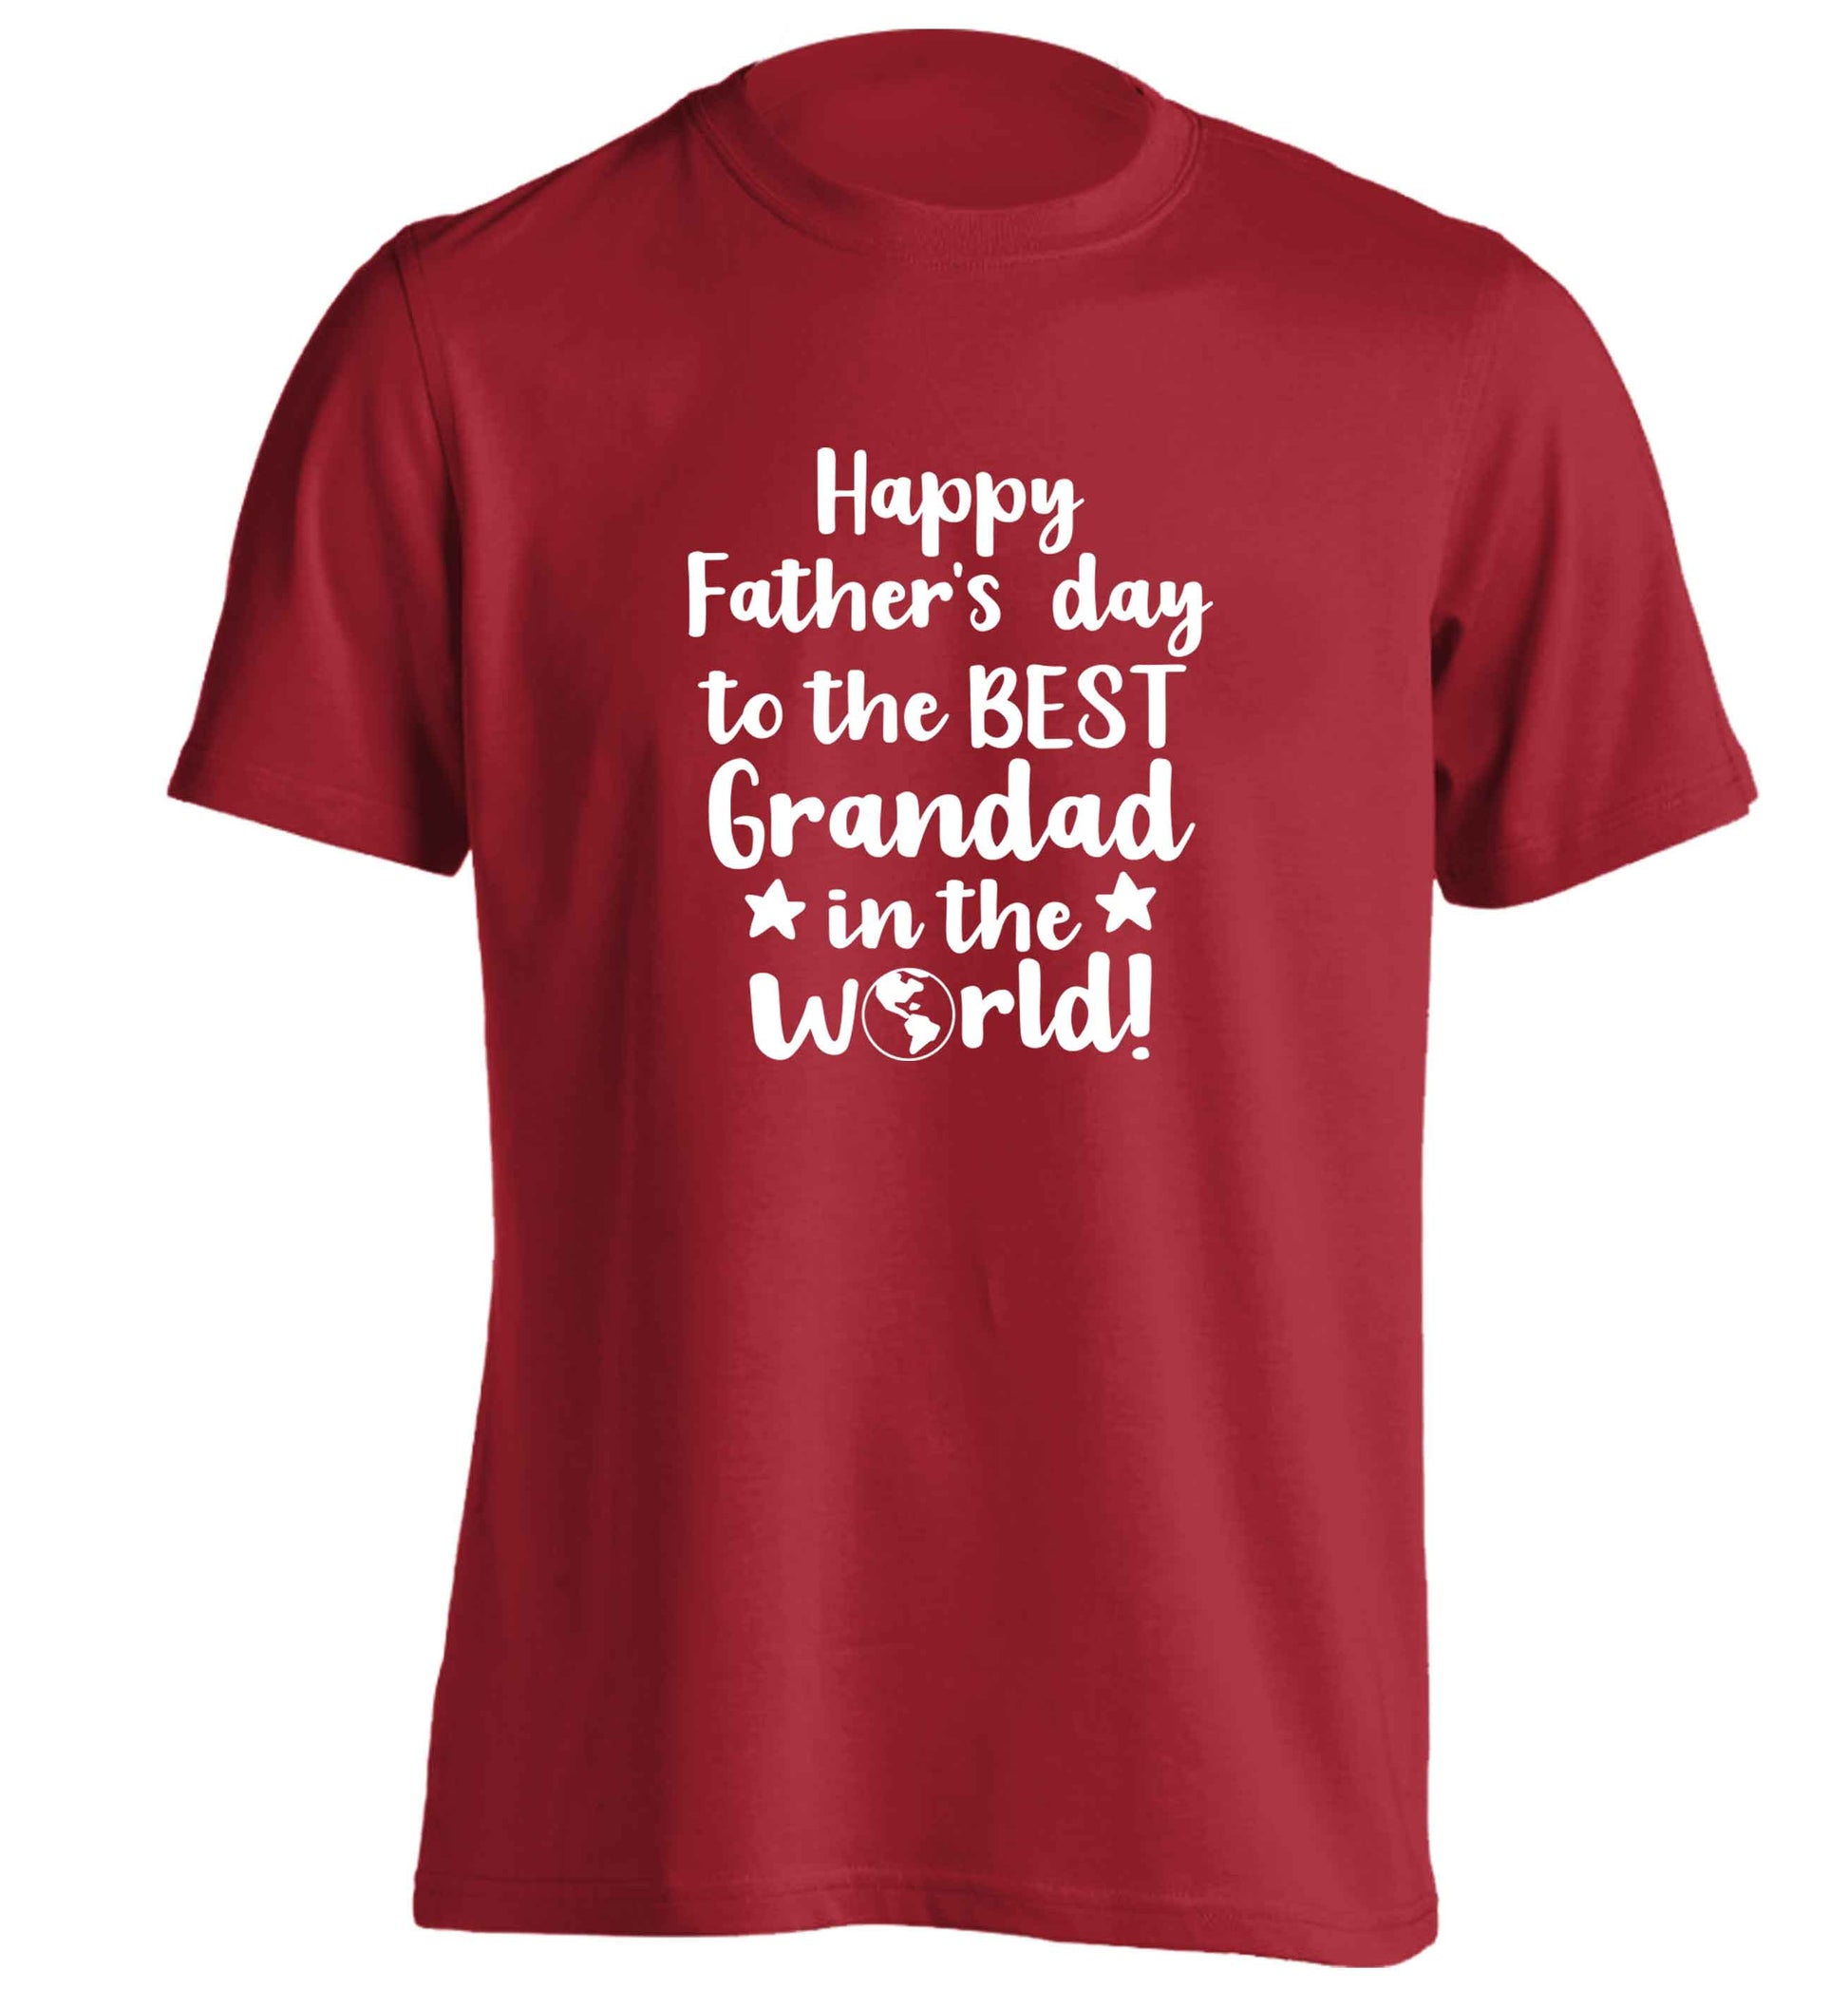 Happy Father's day to the best grandad in the world adults unisex red Tshirt 2XL